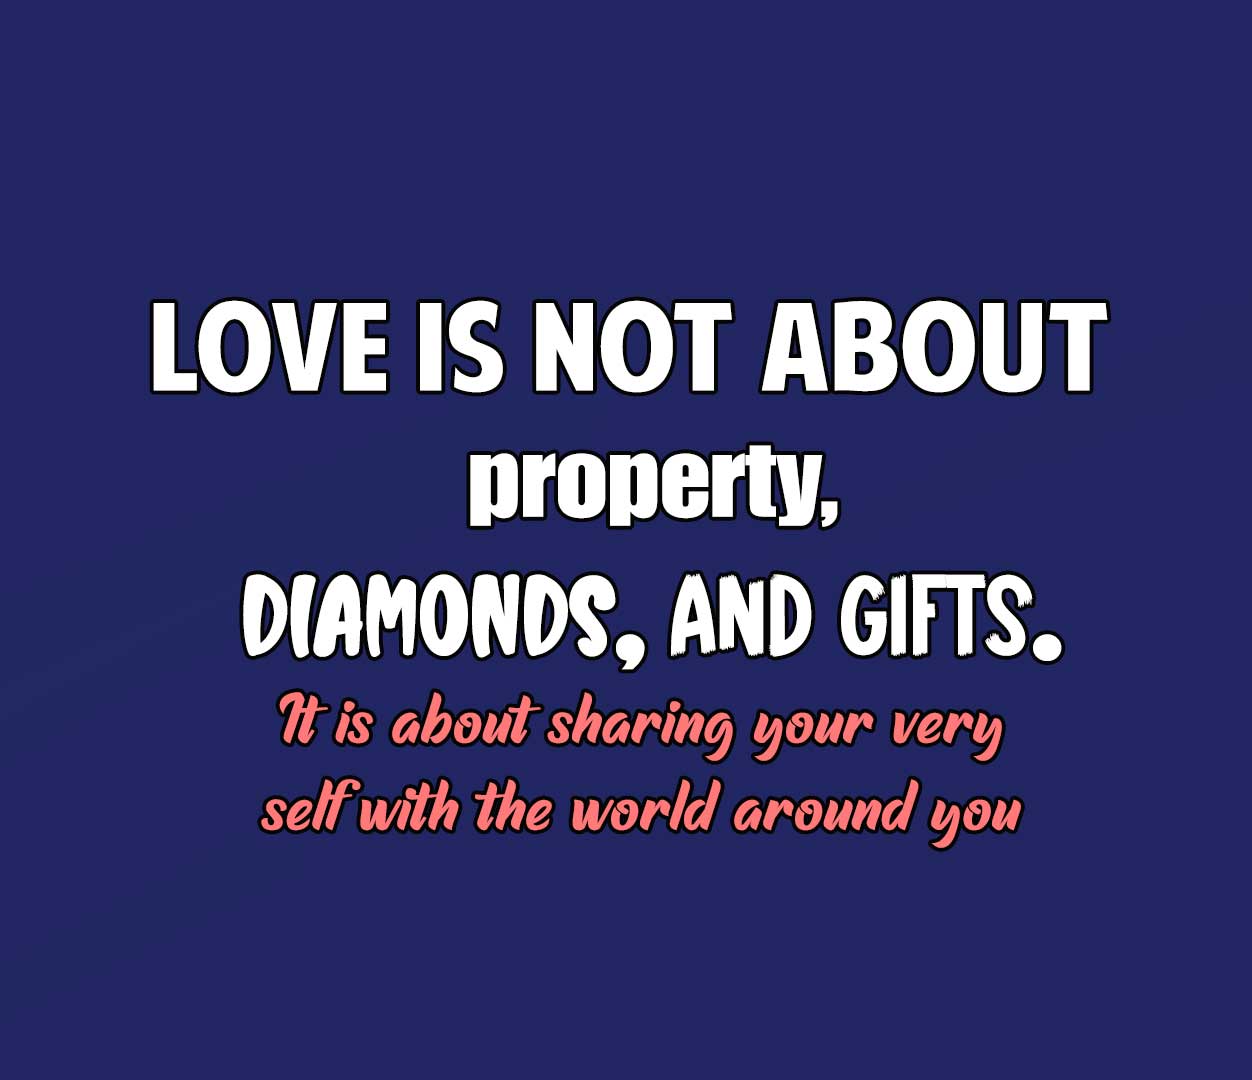 Love is not about property, diamonds, and gifts. It is about sharing your very self with the world around you